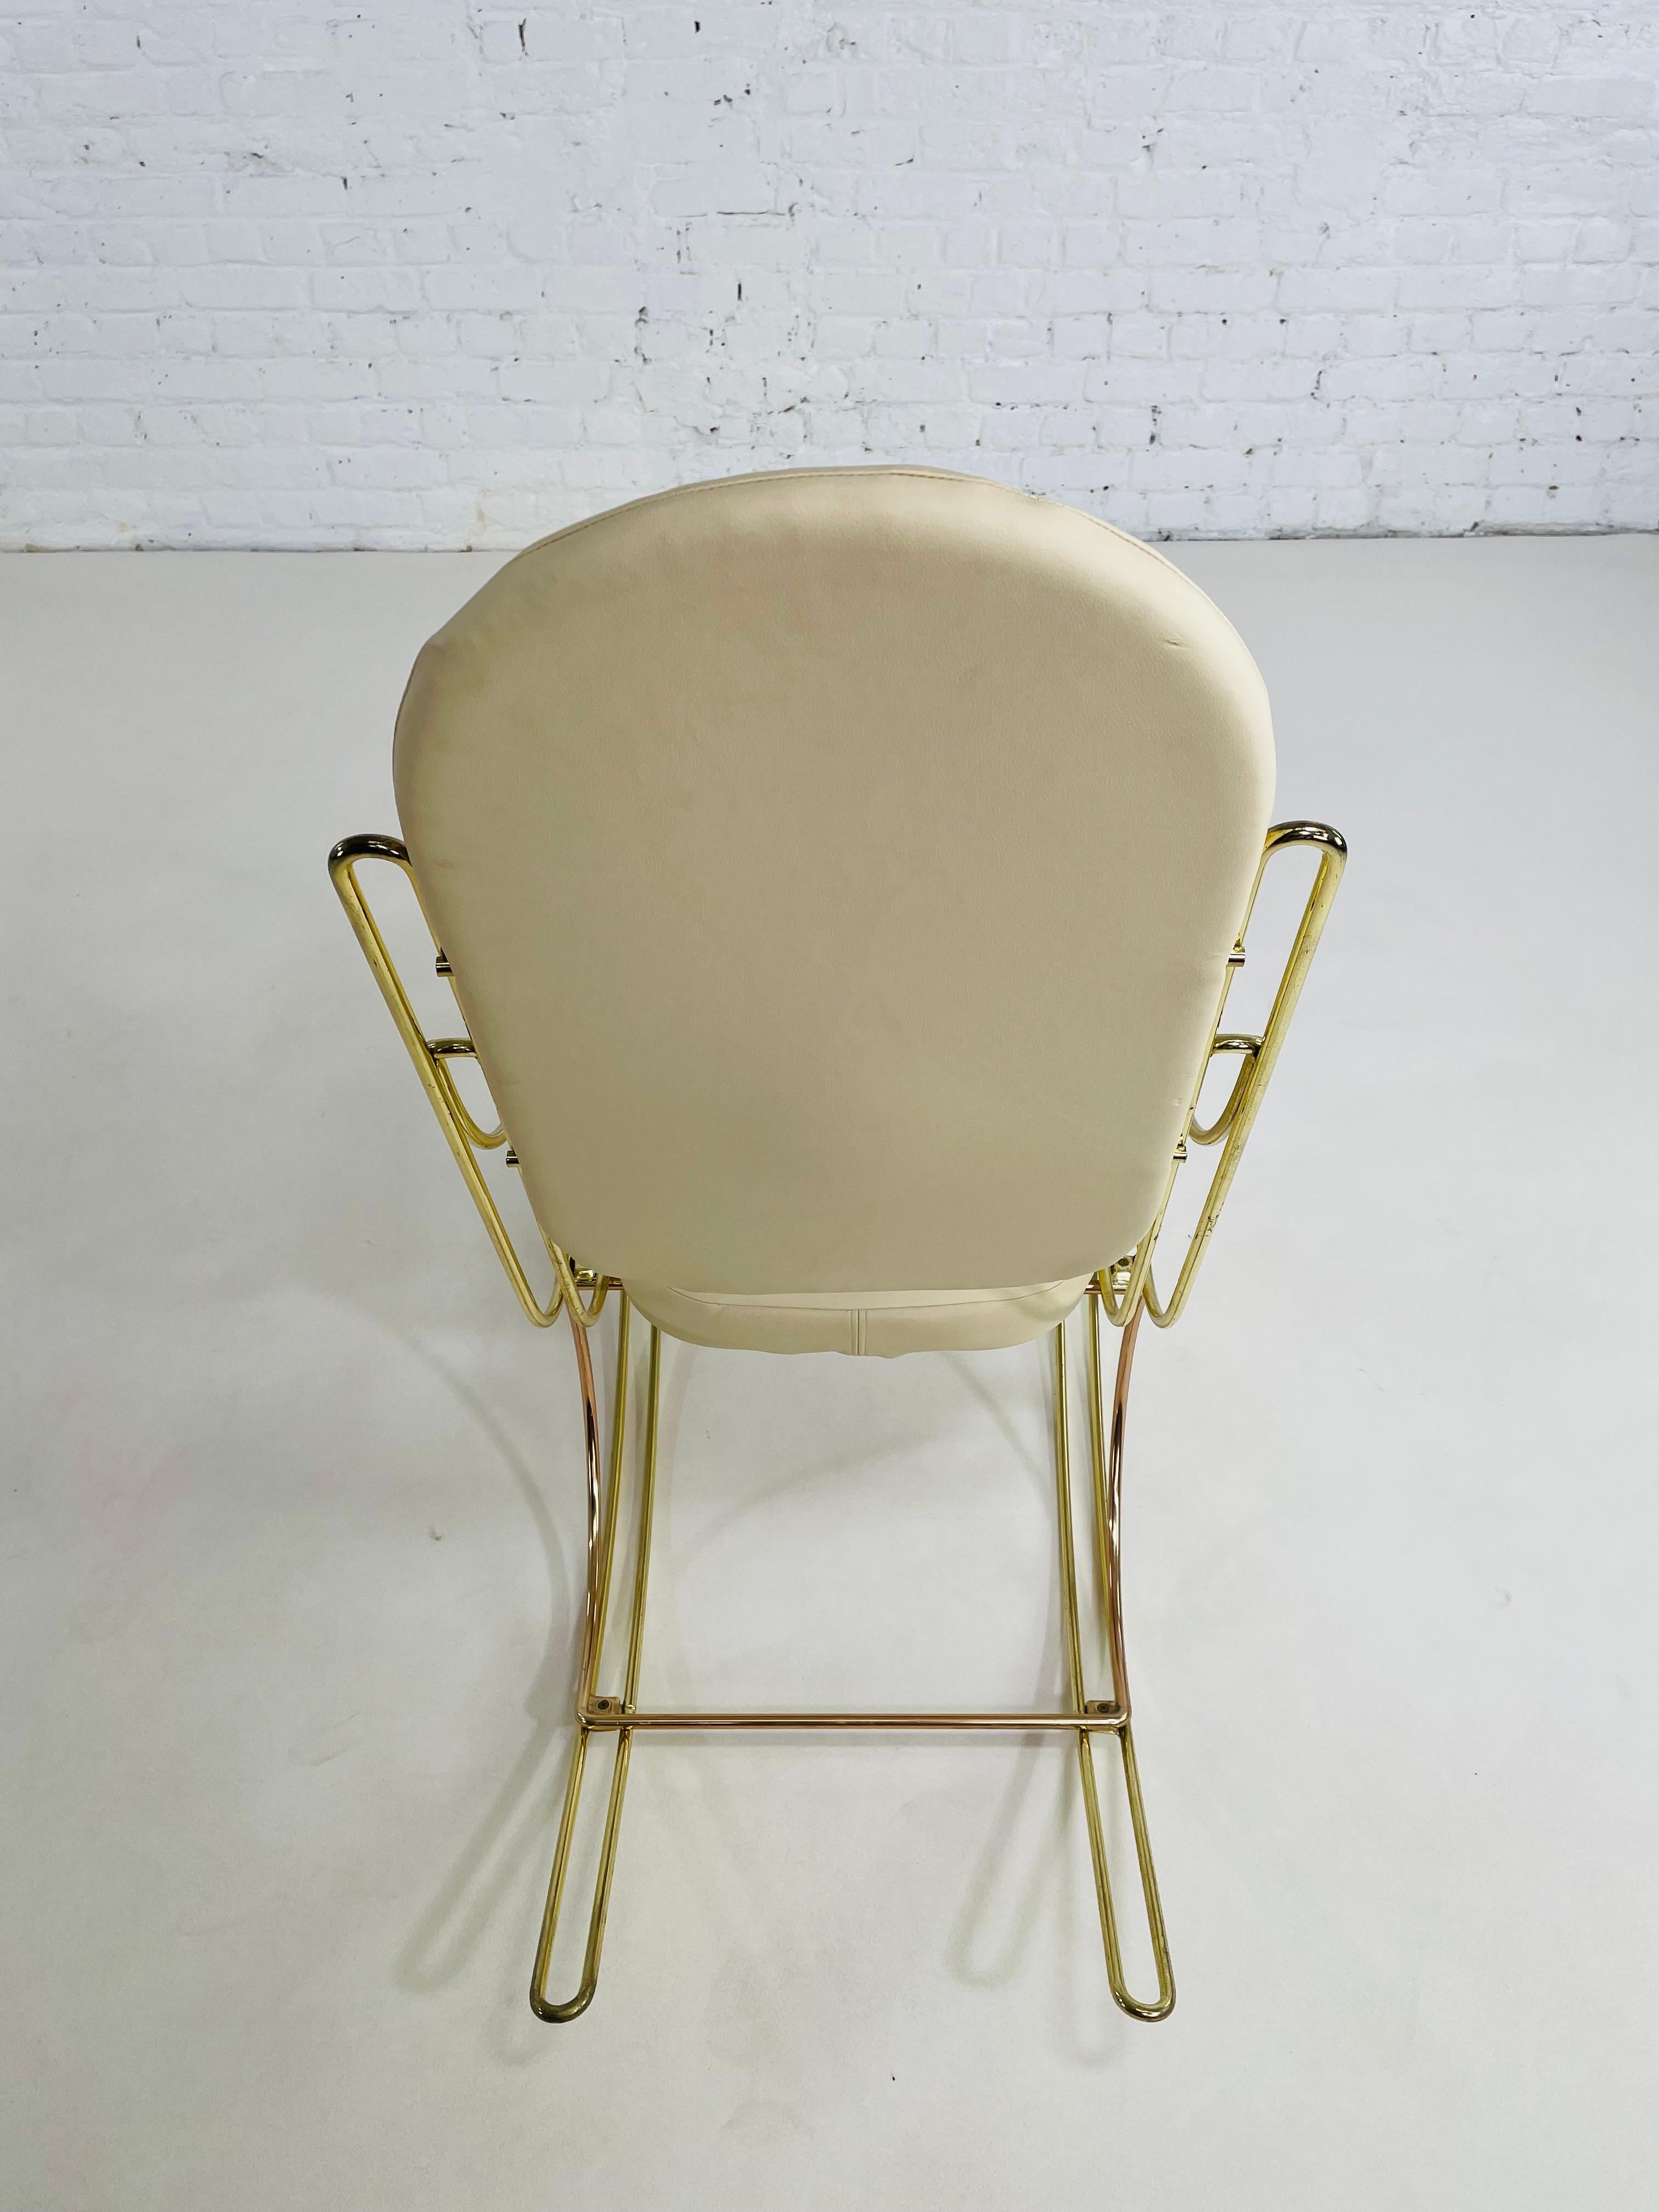 1960s-1970s Brass And Beige Faux Leather Rocking Chair For Sale 3